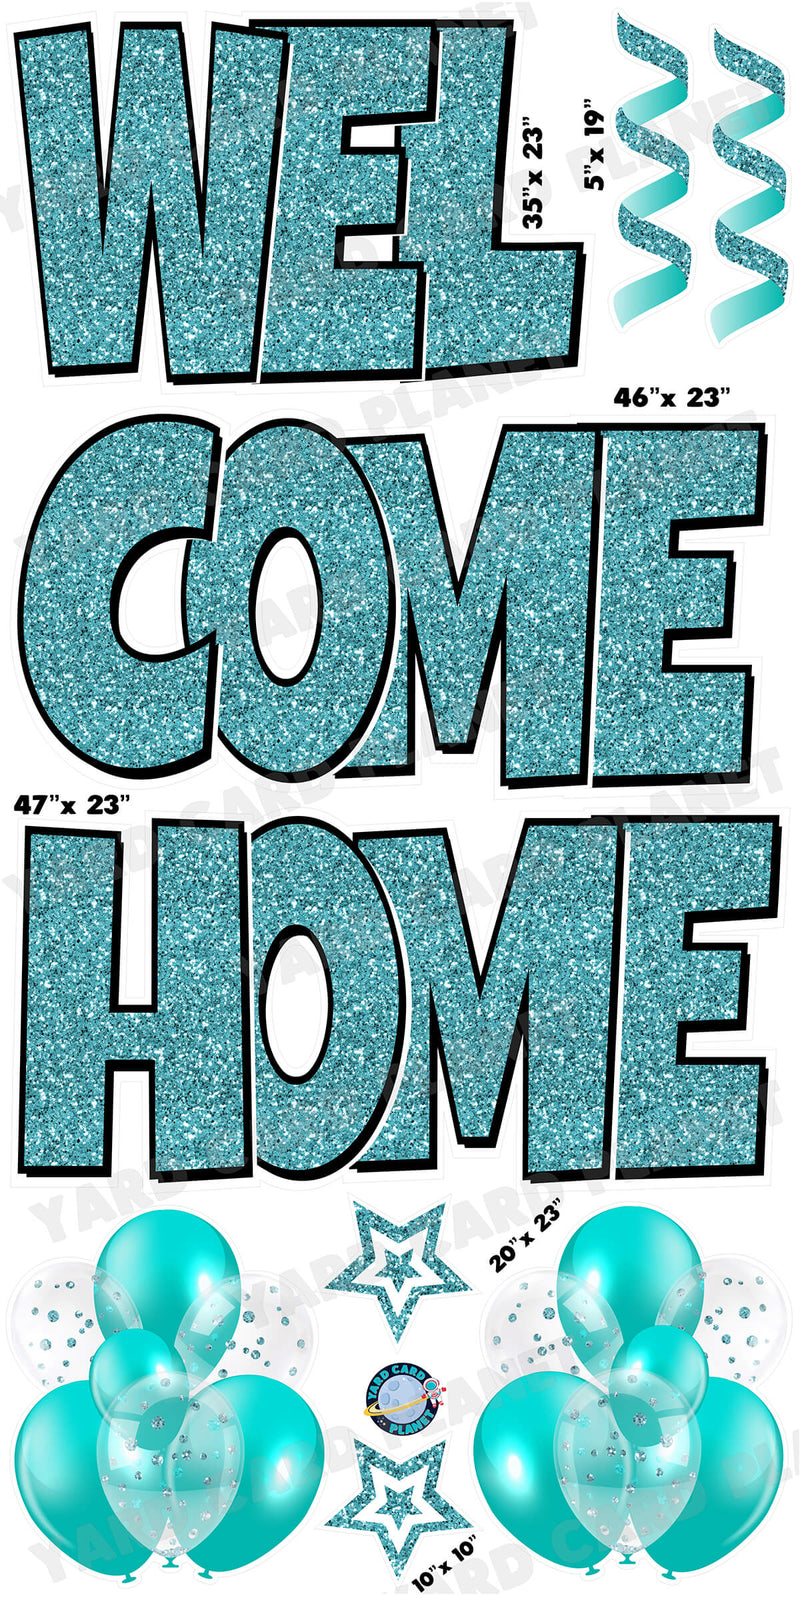 Large 23" Welcome Home Yard Card EZ Quick Sets in Luckiest Guy Font and Flair in Teal Glitter Pattern